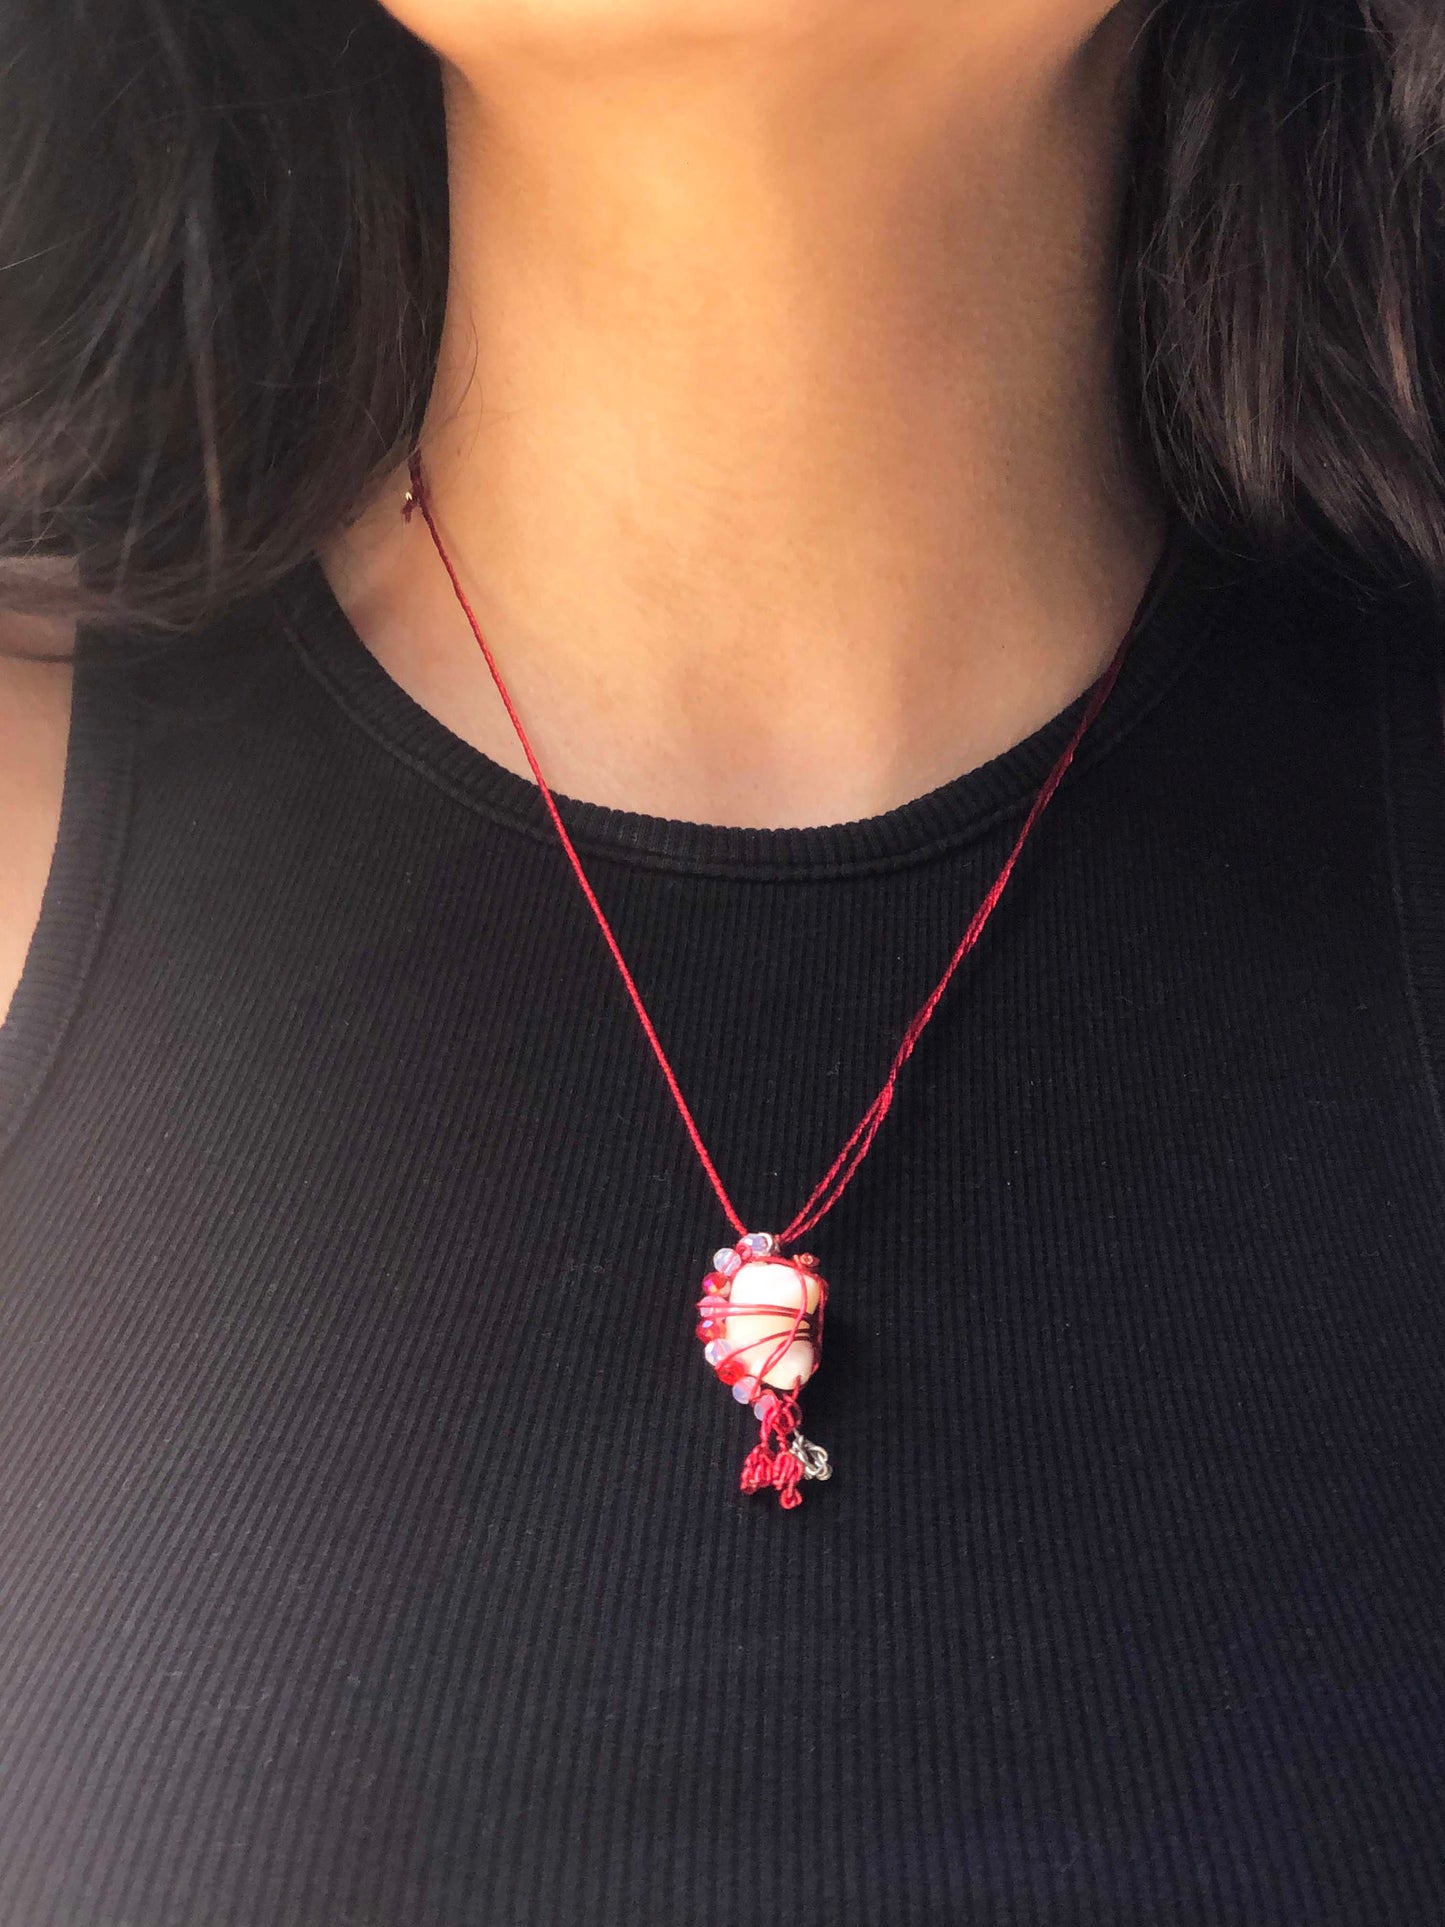 handcrafted red and silver wire wrapped seashell pendant with clear and red crystal beads and adjustable knot ties.